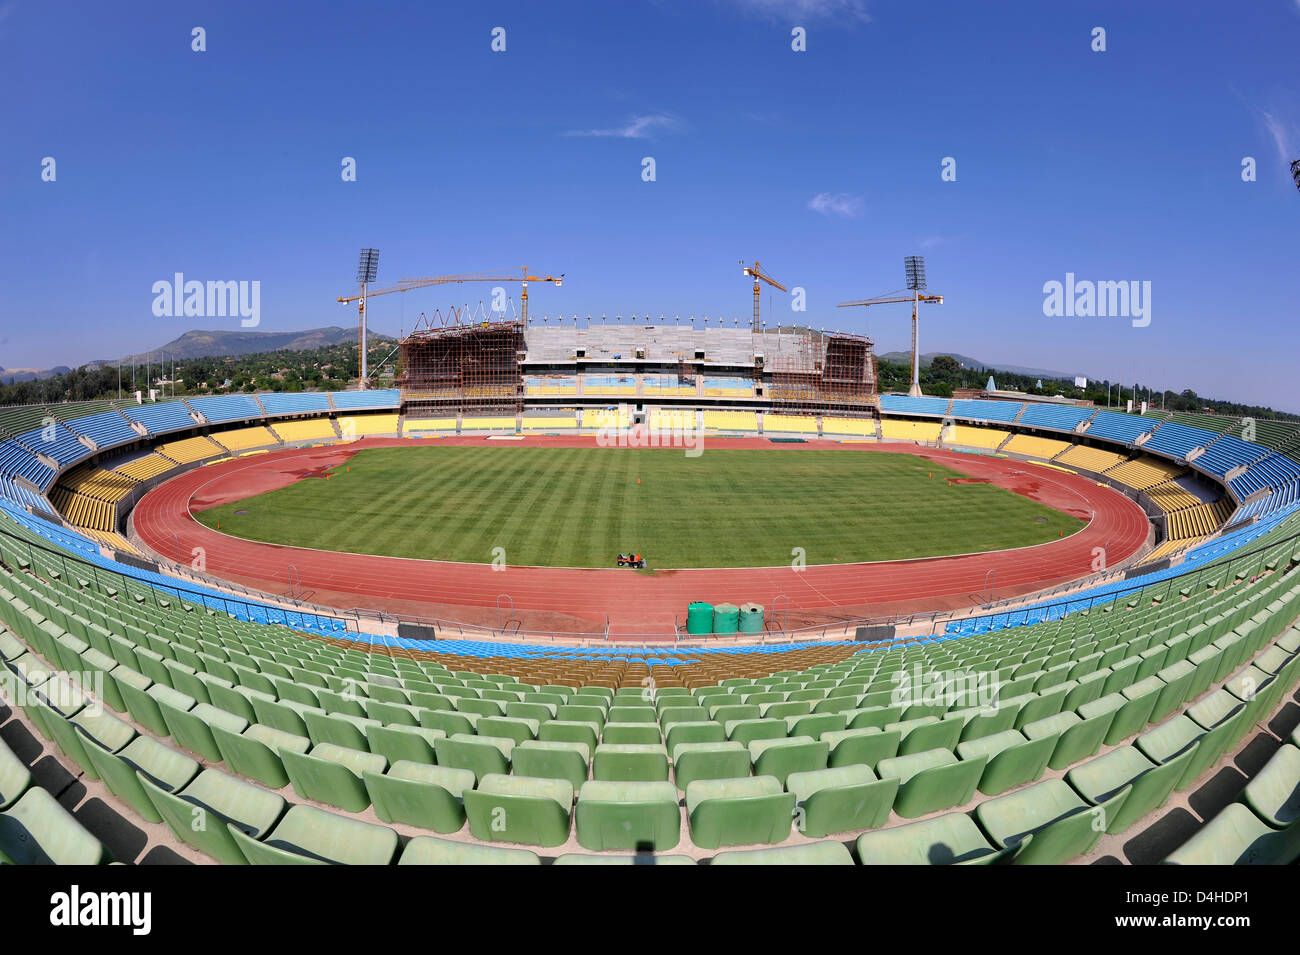 View into the construction site of the Royal Bafokeng stadium on Rustenburg, South Africa, 25 November 2008. The stadium should be a venue for both the 2009 FIFA Confederations Cup and the 2010 FIFA World Cup South Africa. Photo: Gero Breloer Stock Photo